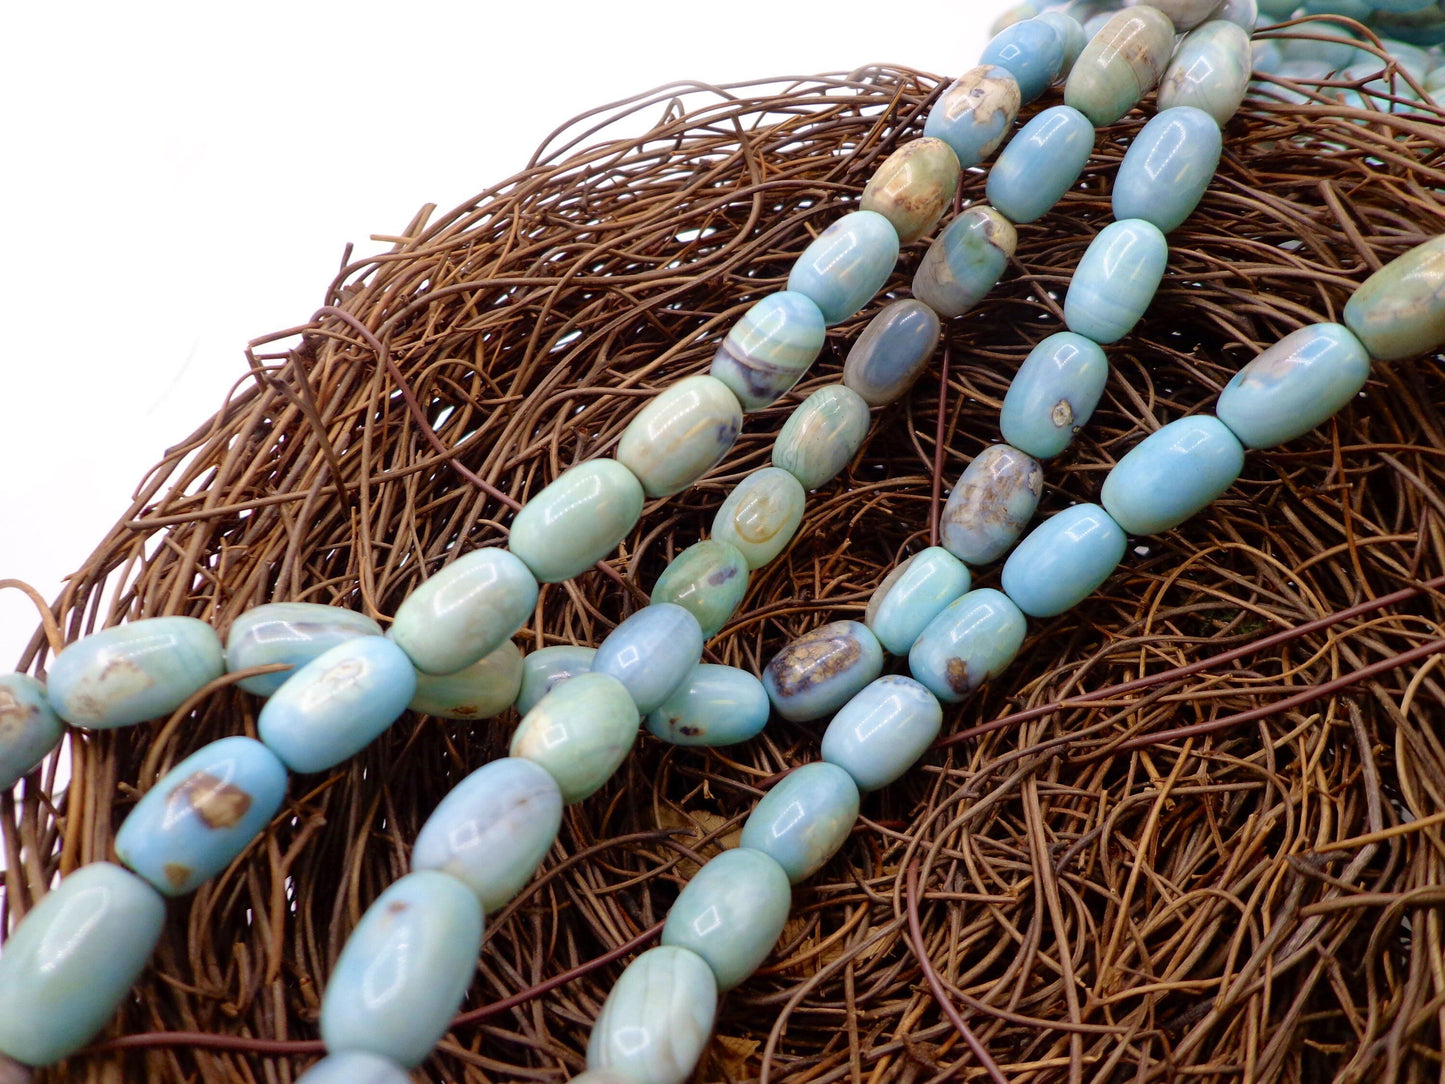 NATURAL Gemstone Sky Blue Dragon Skin Agate, Tube Shape 12x8mm,Full Strand 16" Great for making JEWELRY! Not treated in anyway!